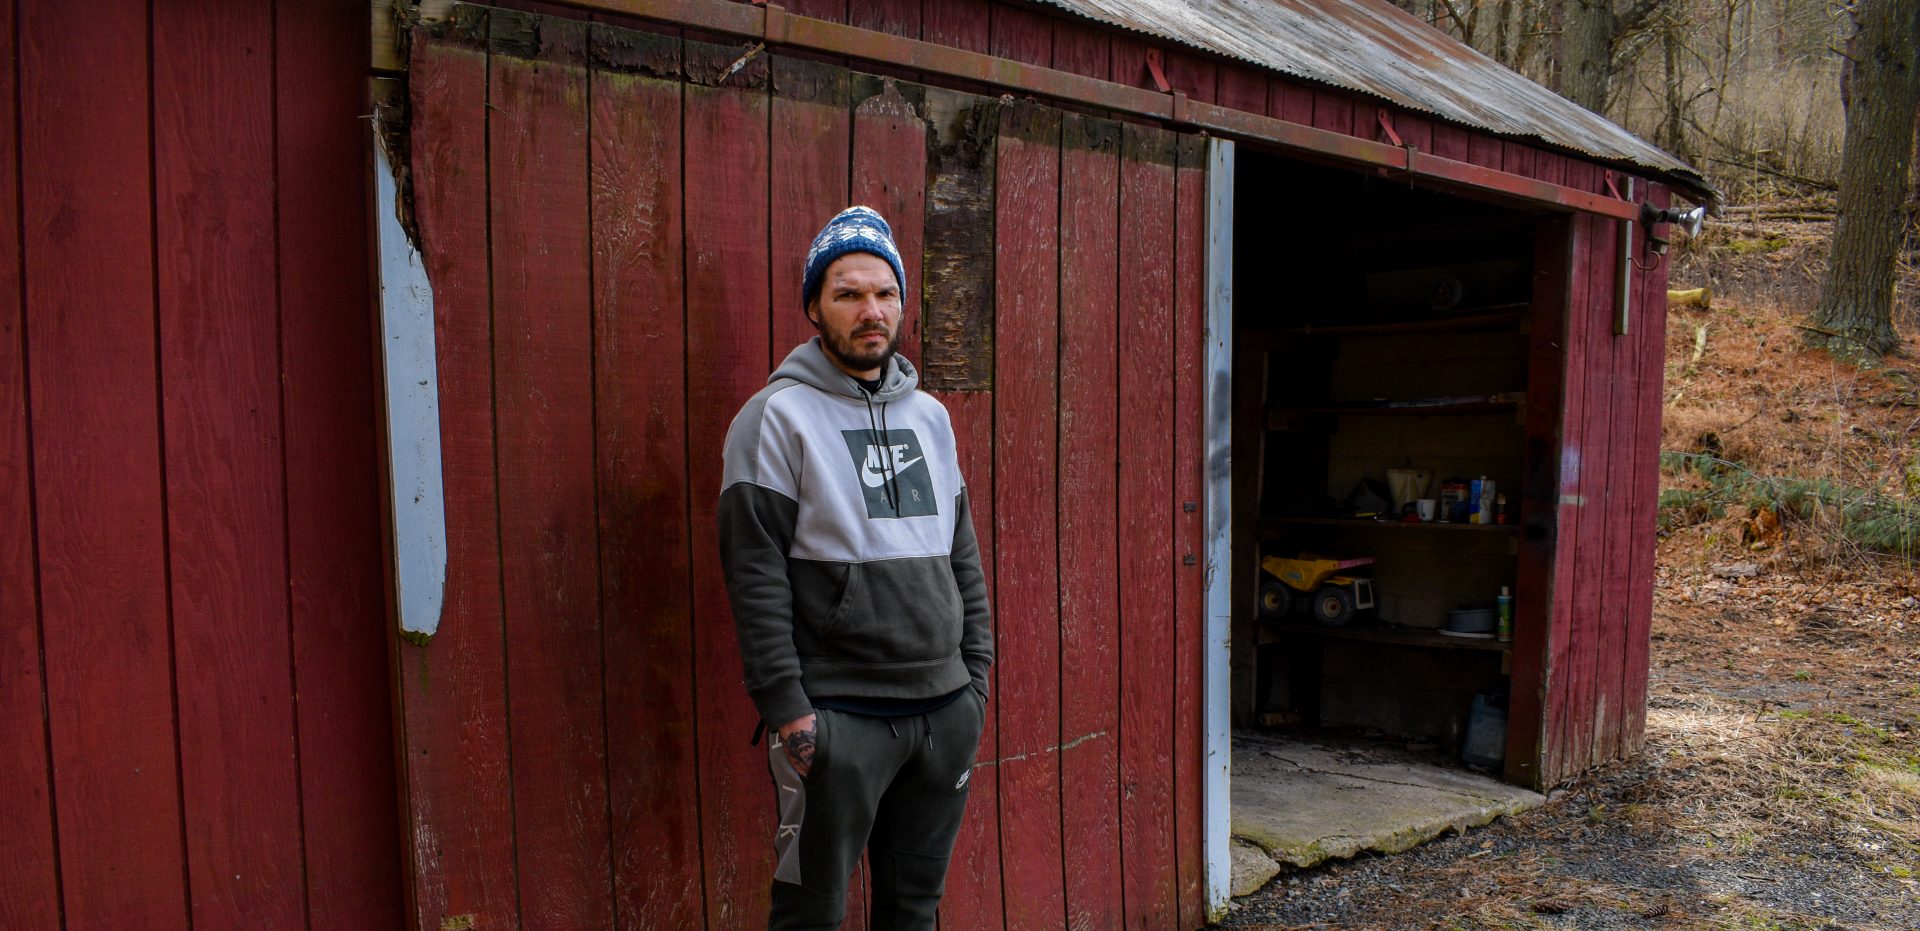 Jordan Bugg stands outside a shed at his mothers home, where he lives, in Catawissa, Pennsylvania. Jordan suffered from a tooth abscess in the Lebanon County jail, which he says was ignored by medical staff until he ended up on life support. 